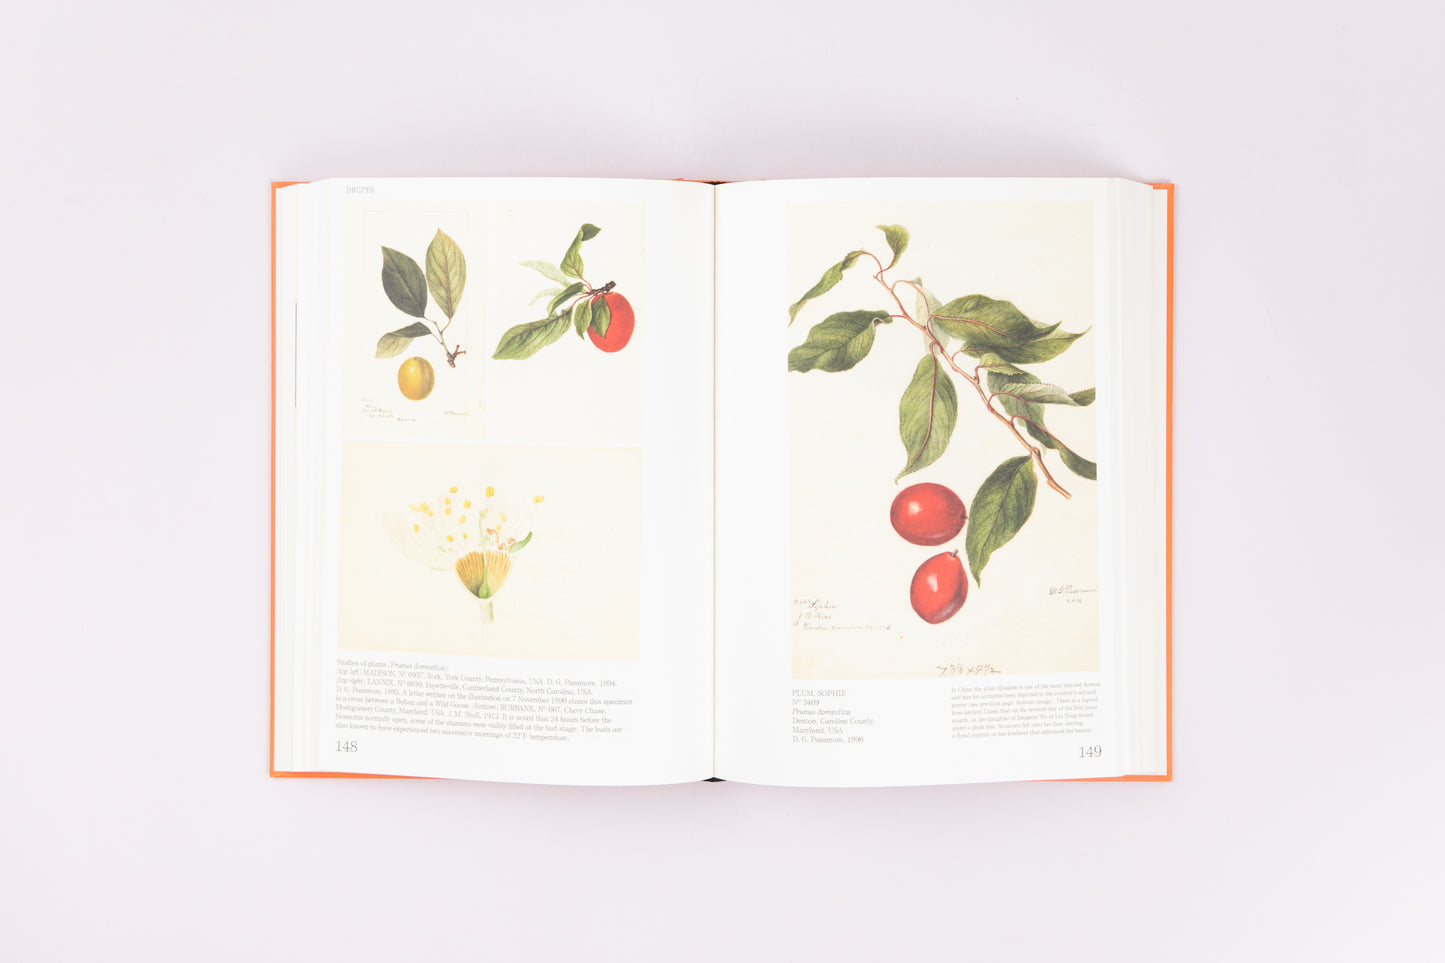 An Illustrated Catalog of American Fruits & Nuts